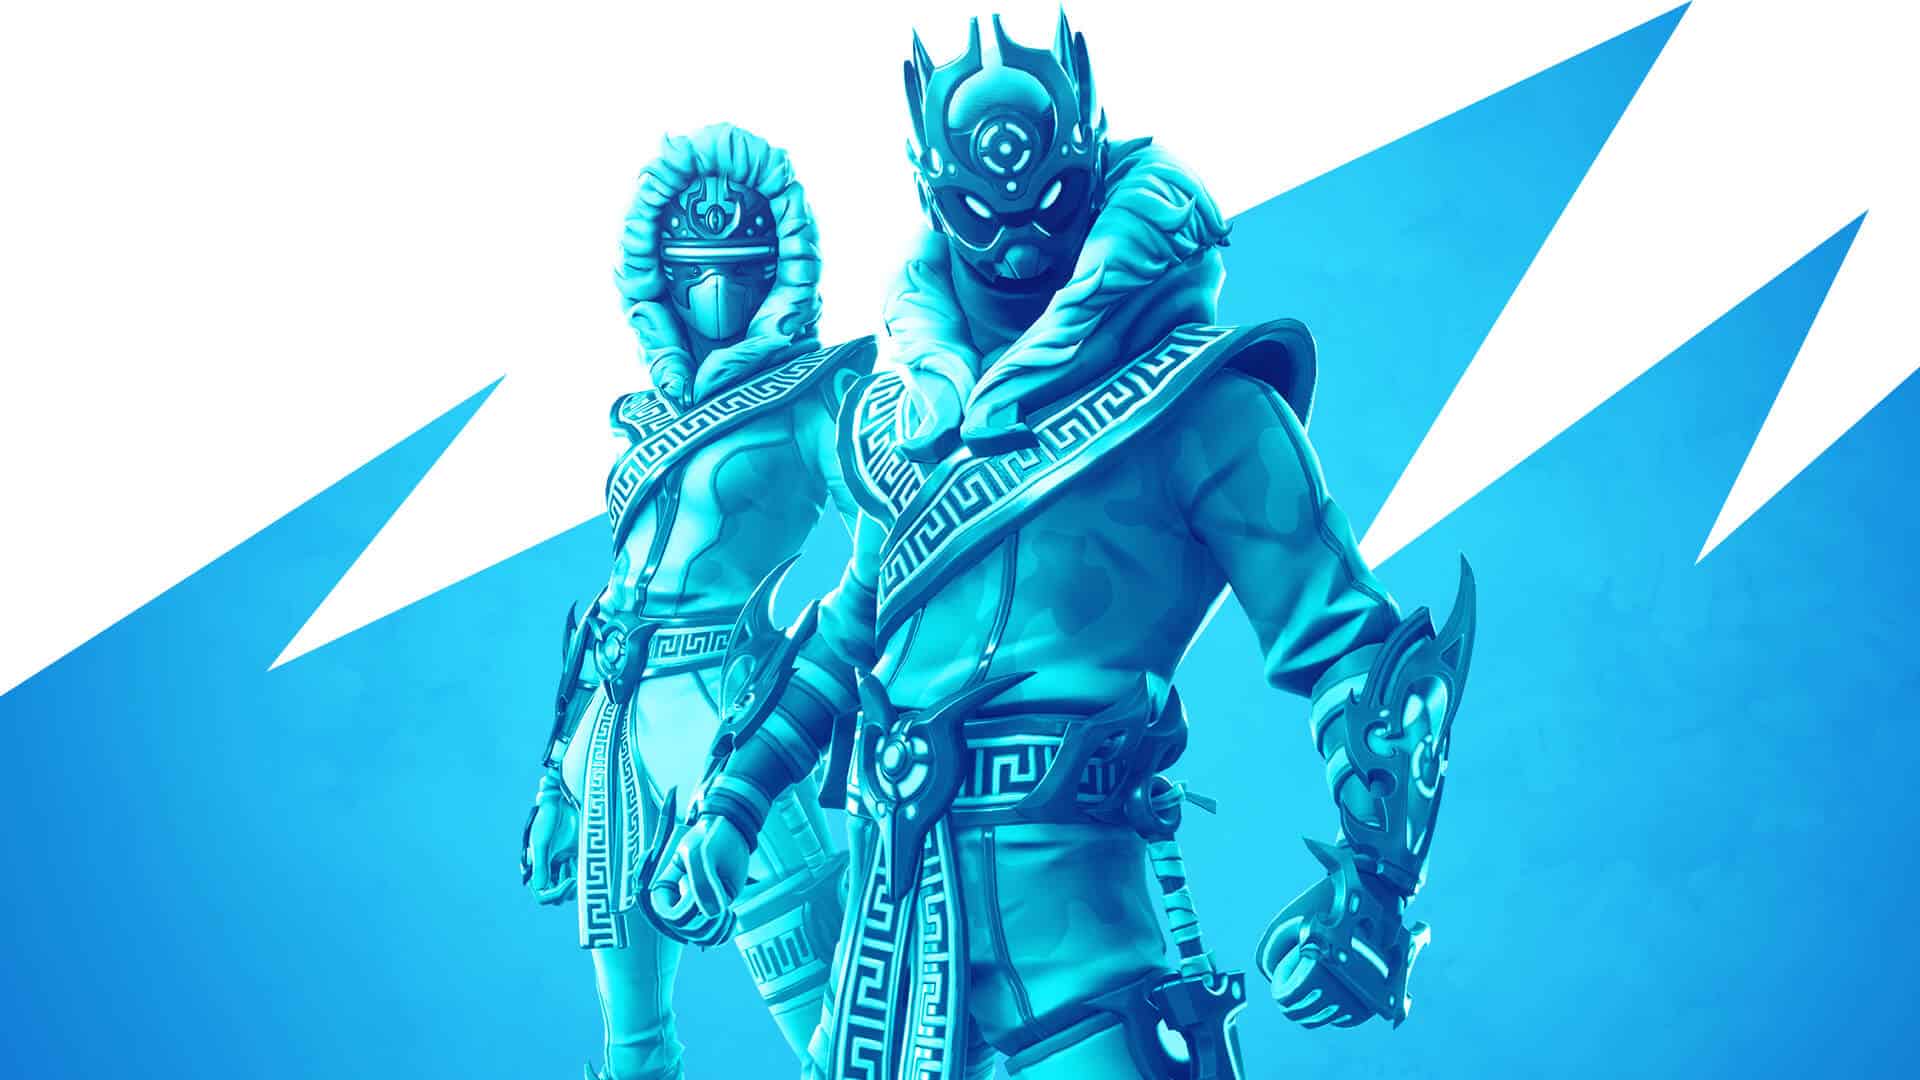 FortniteEsports news winter royale 2019 leaderboards and payments update 11BR WinterRoyale Announce NewsHeader 1920x1080 cbeff2838b1c059645d27708607e16379c9a68a6